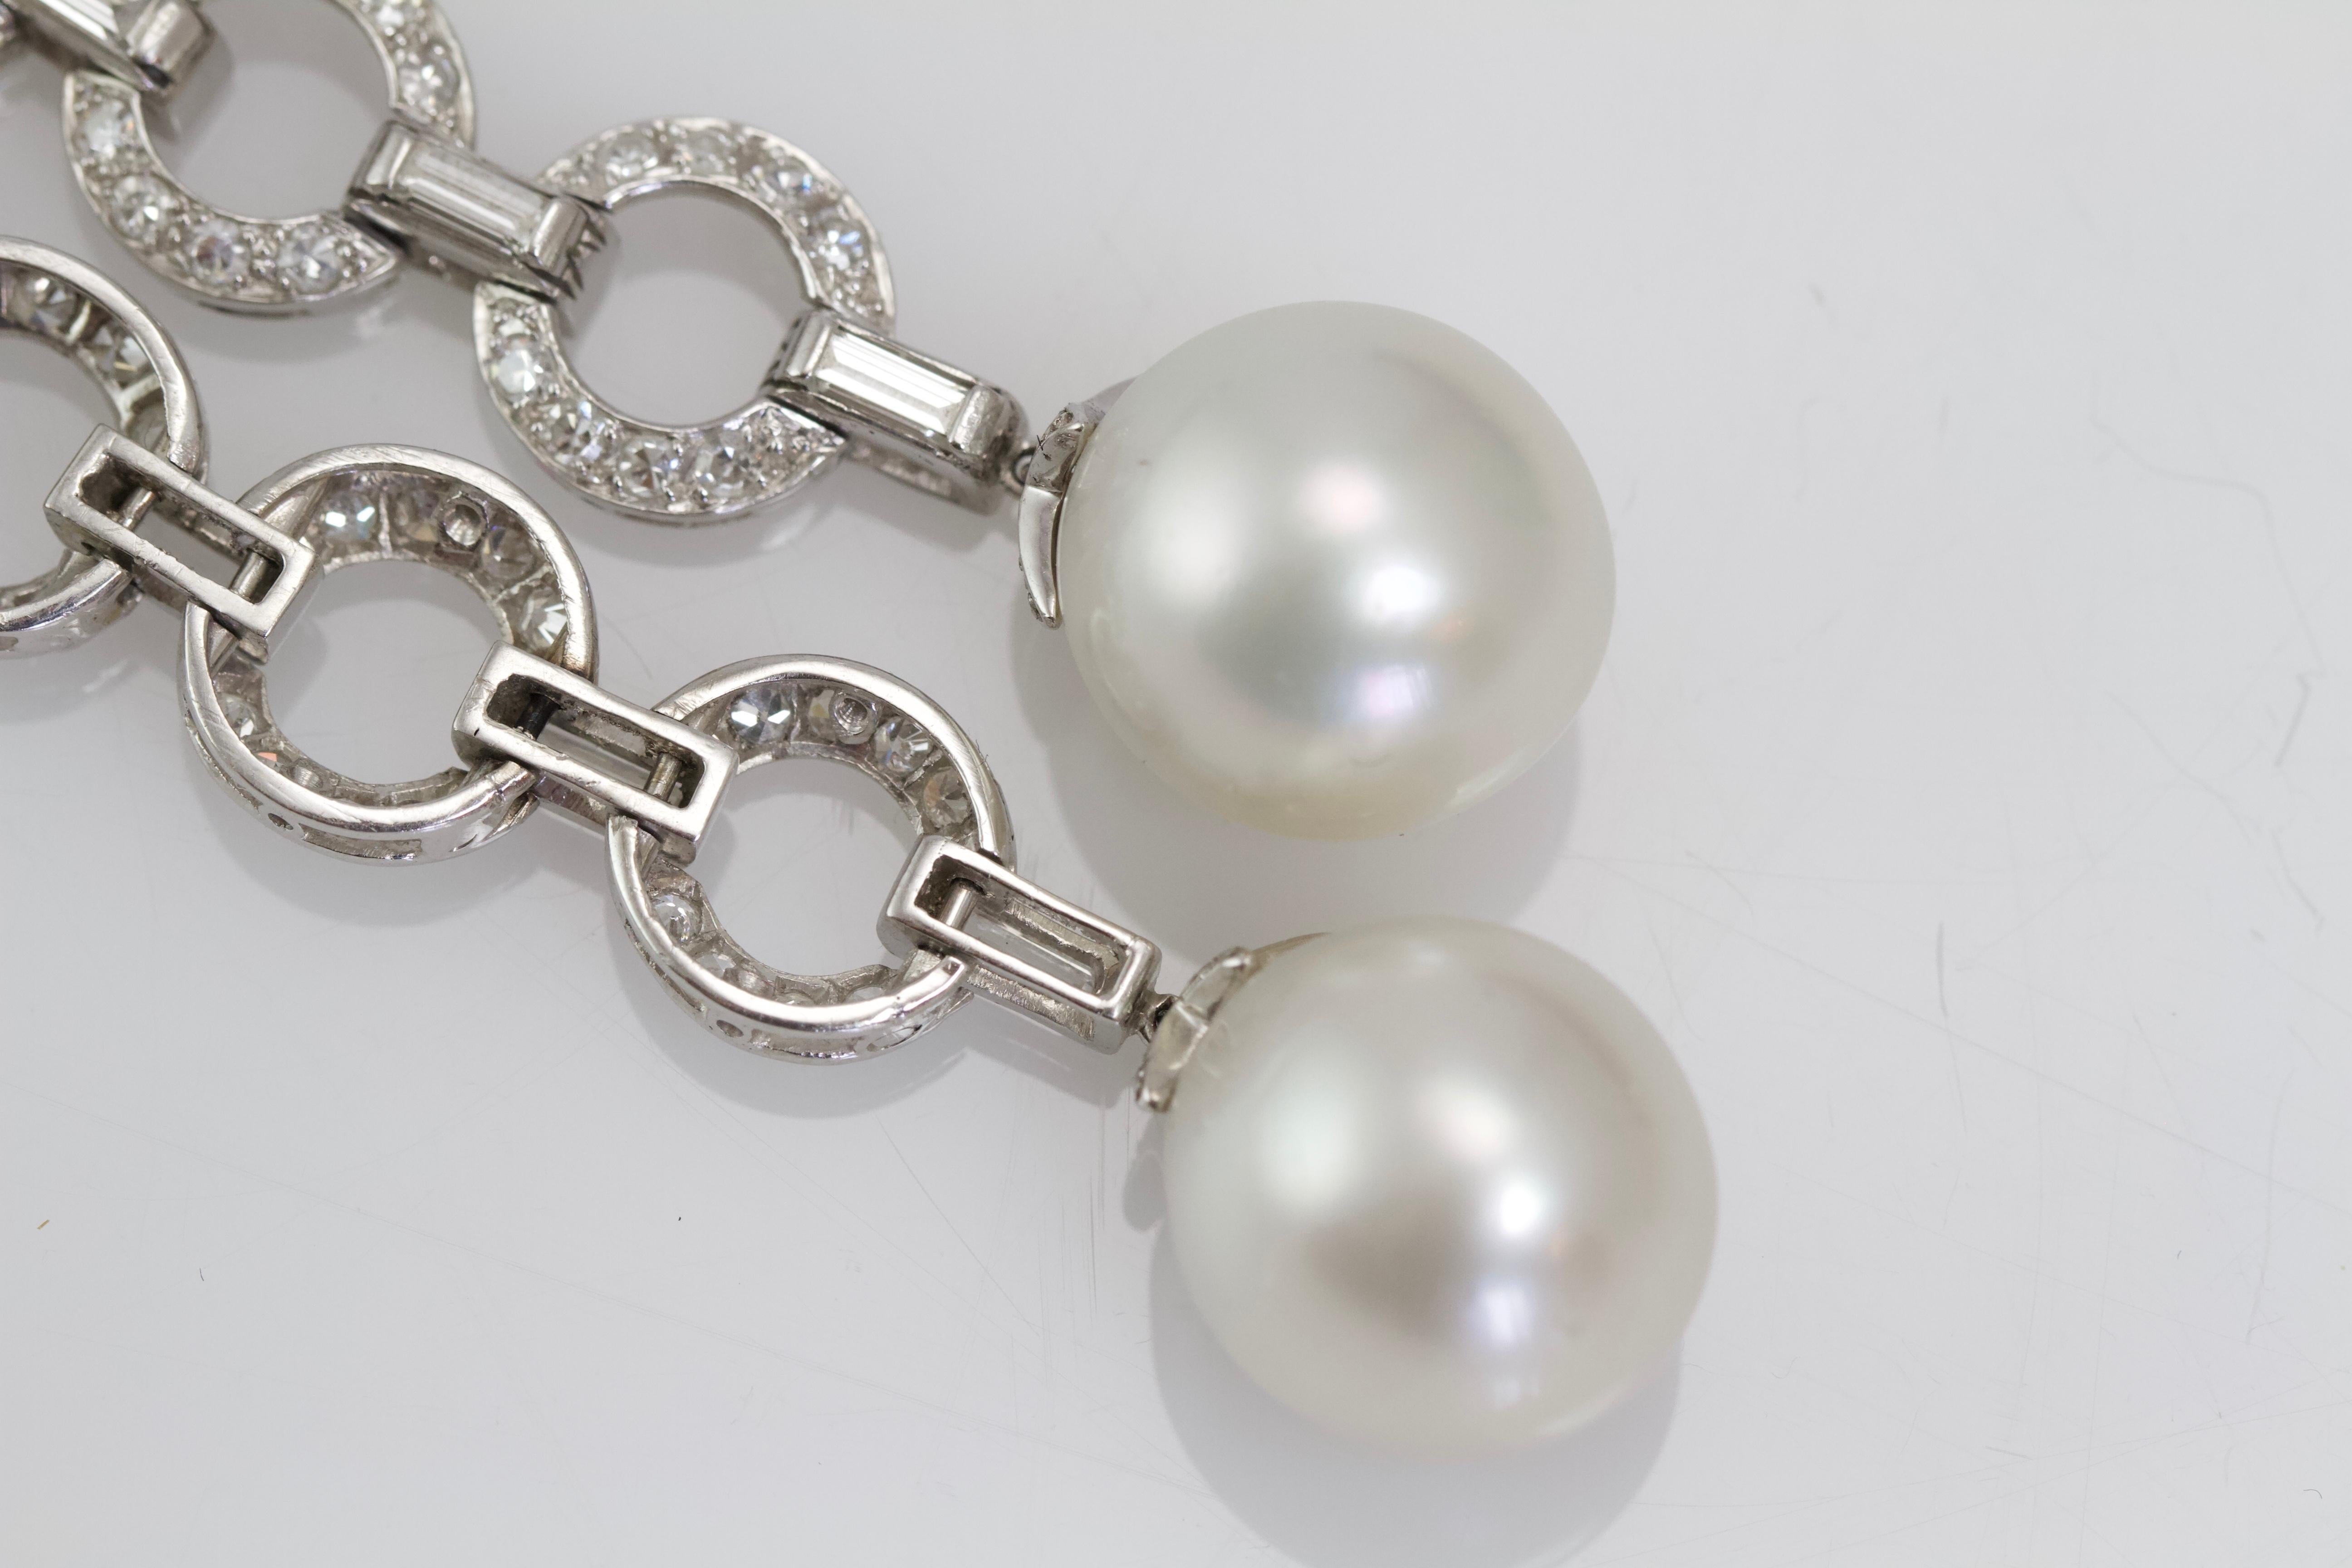 Art Deco Diamond and Cultured-Pearl Earrings from Paris, 1925 For Sale 4